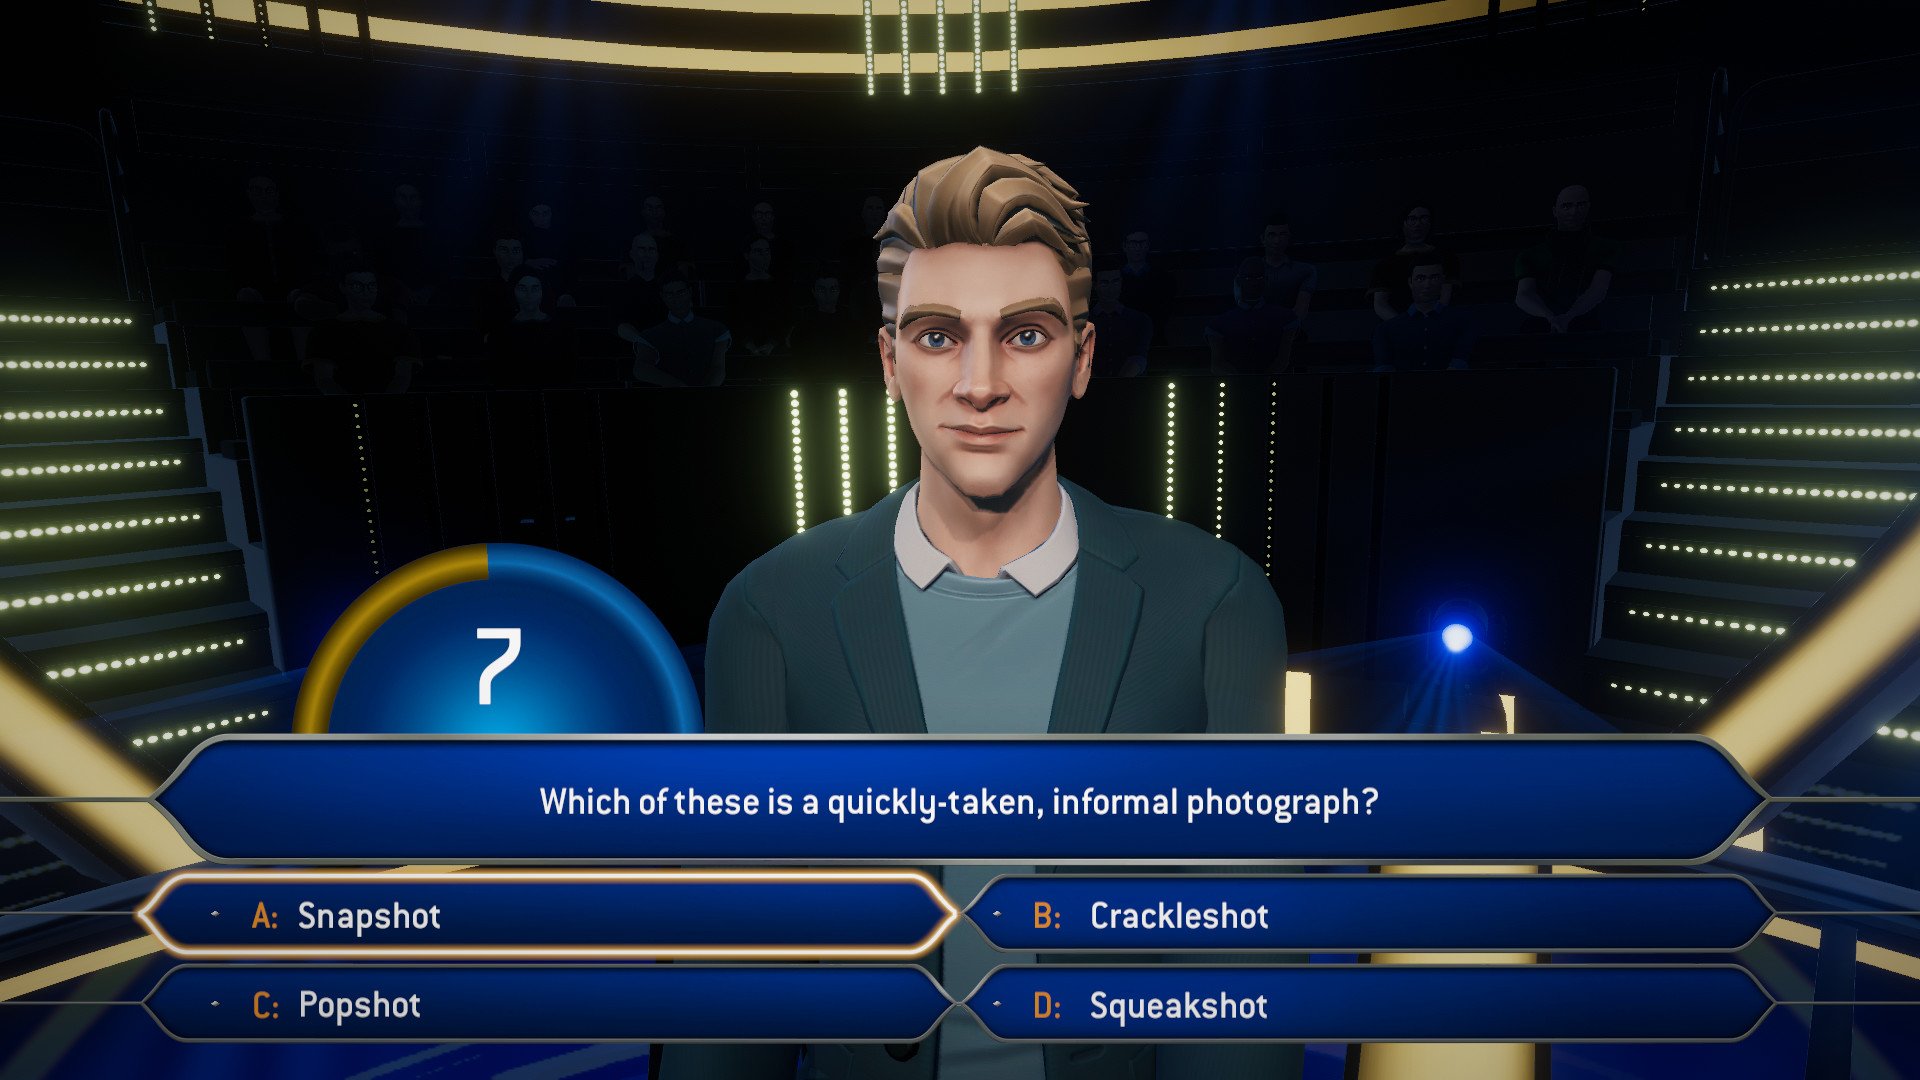 Who Wants To Be A Millionaire 5